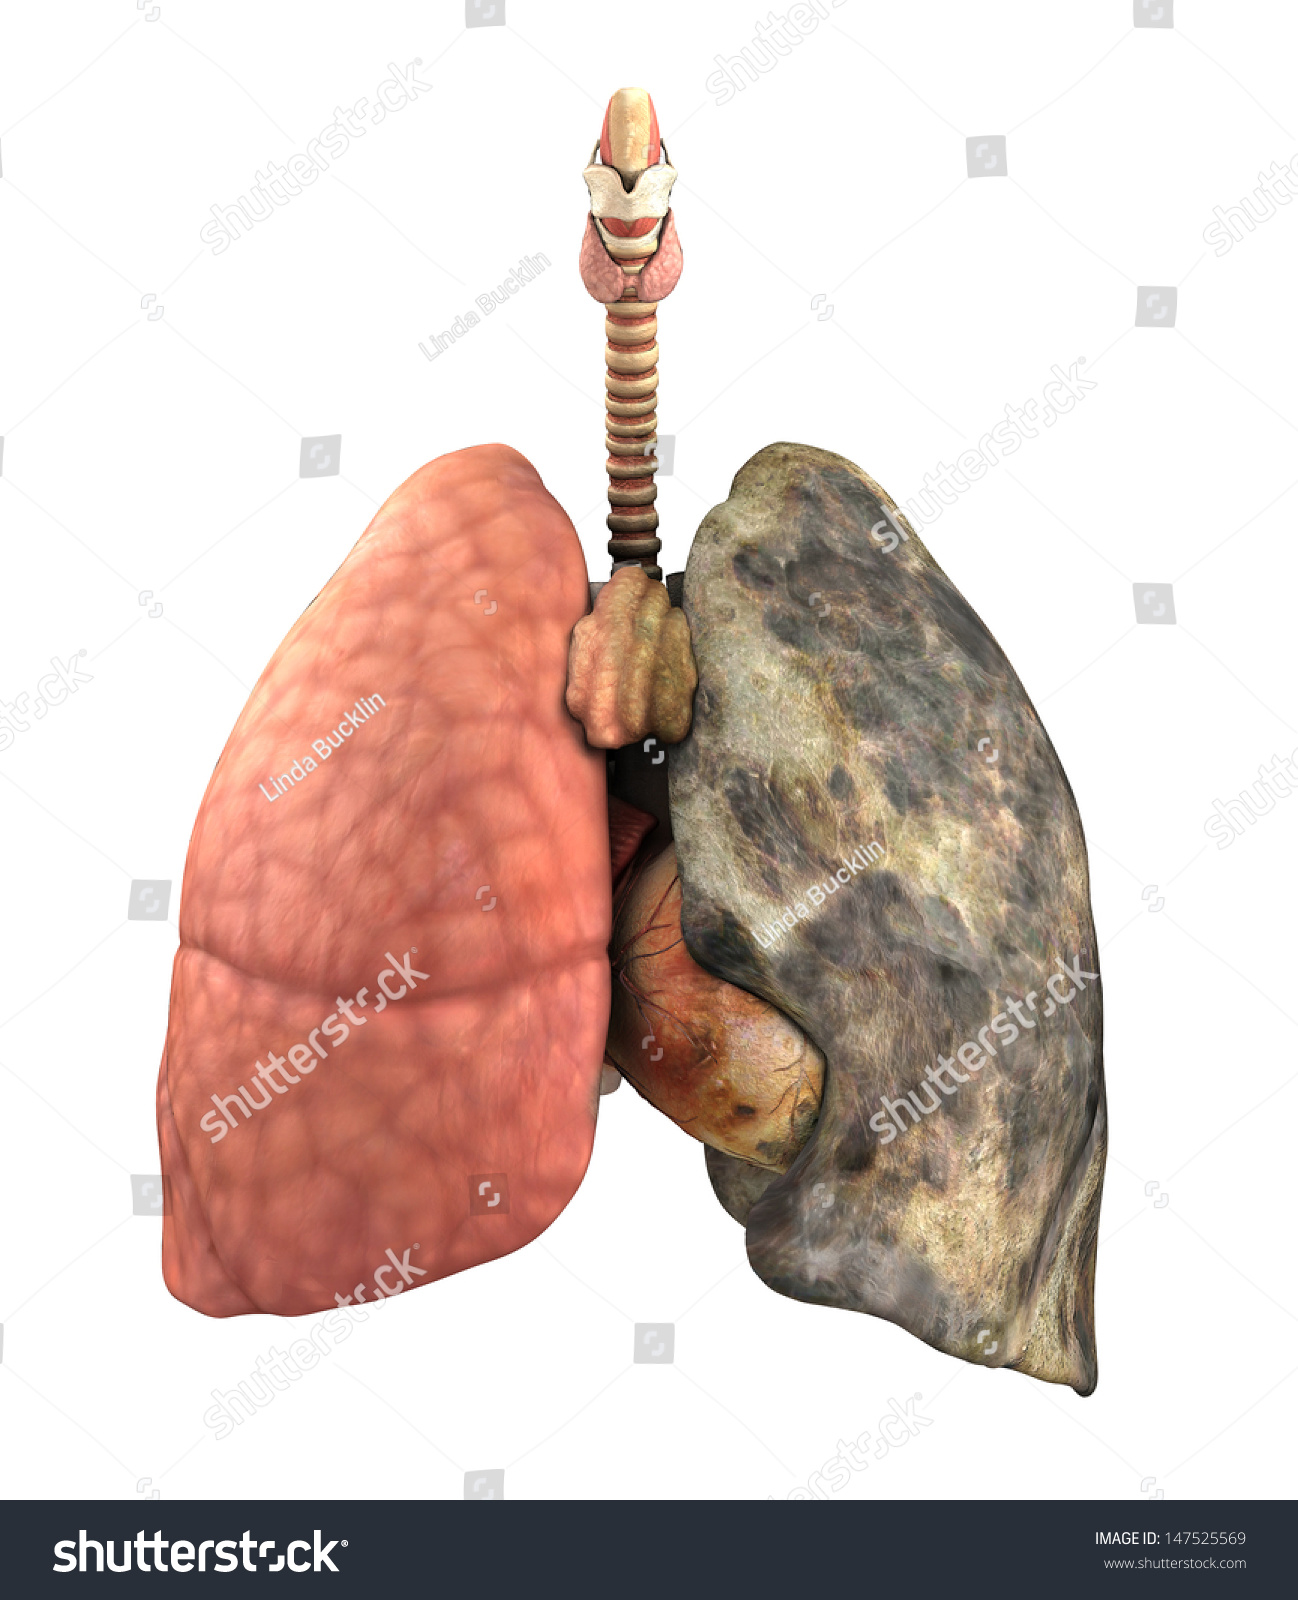 All 90+ Images pictures of smokers’ lungs before and after Sharp